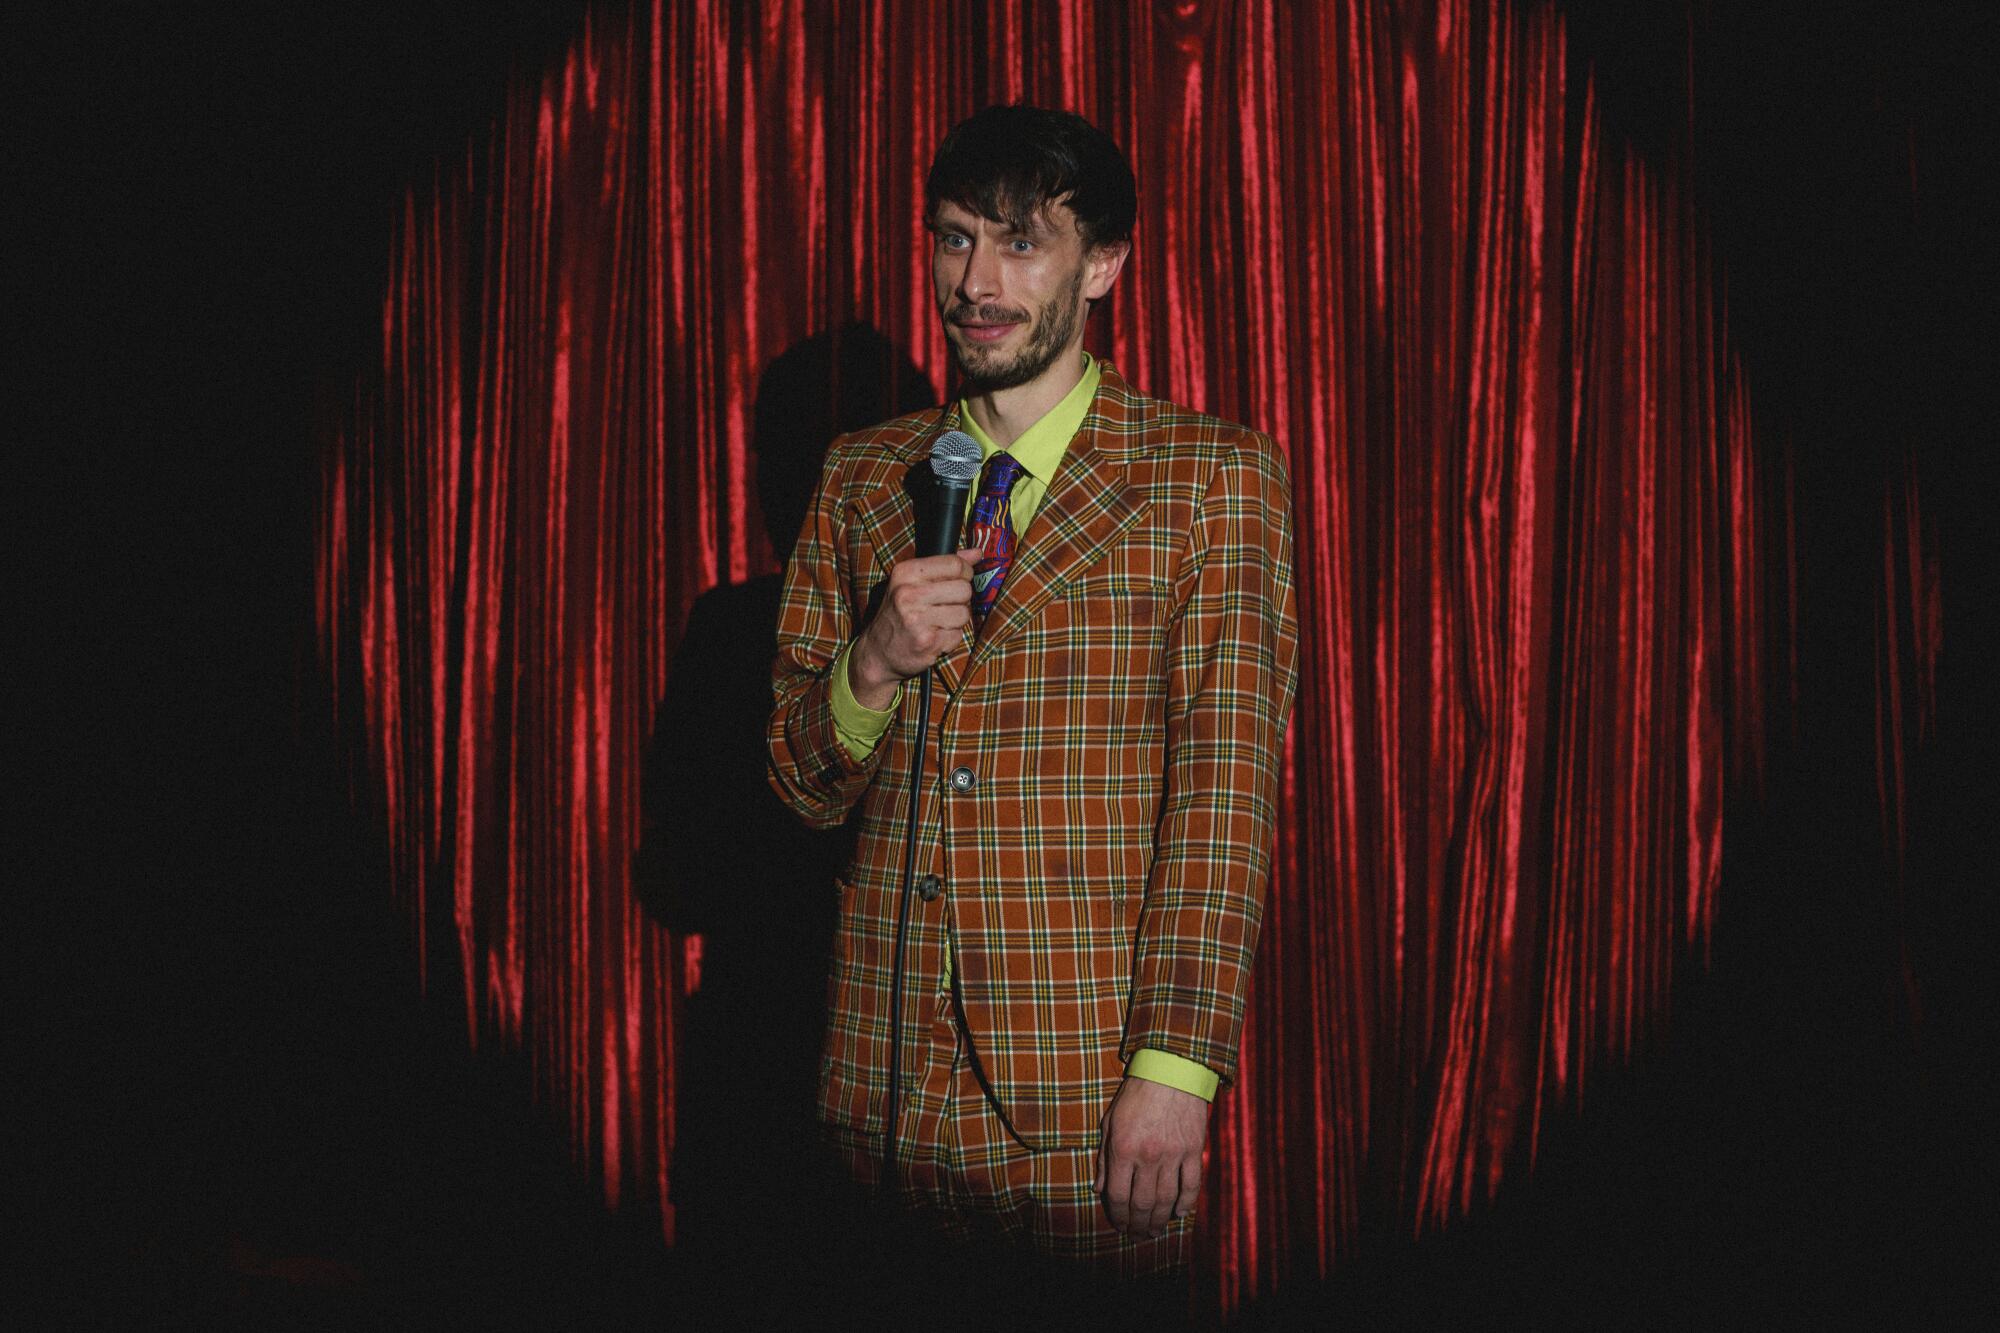 A man in a plaid suit stands onstage holding a microphone in "Baby Reindeer."